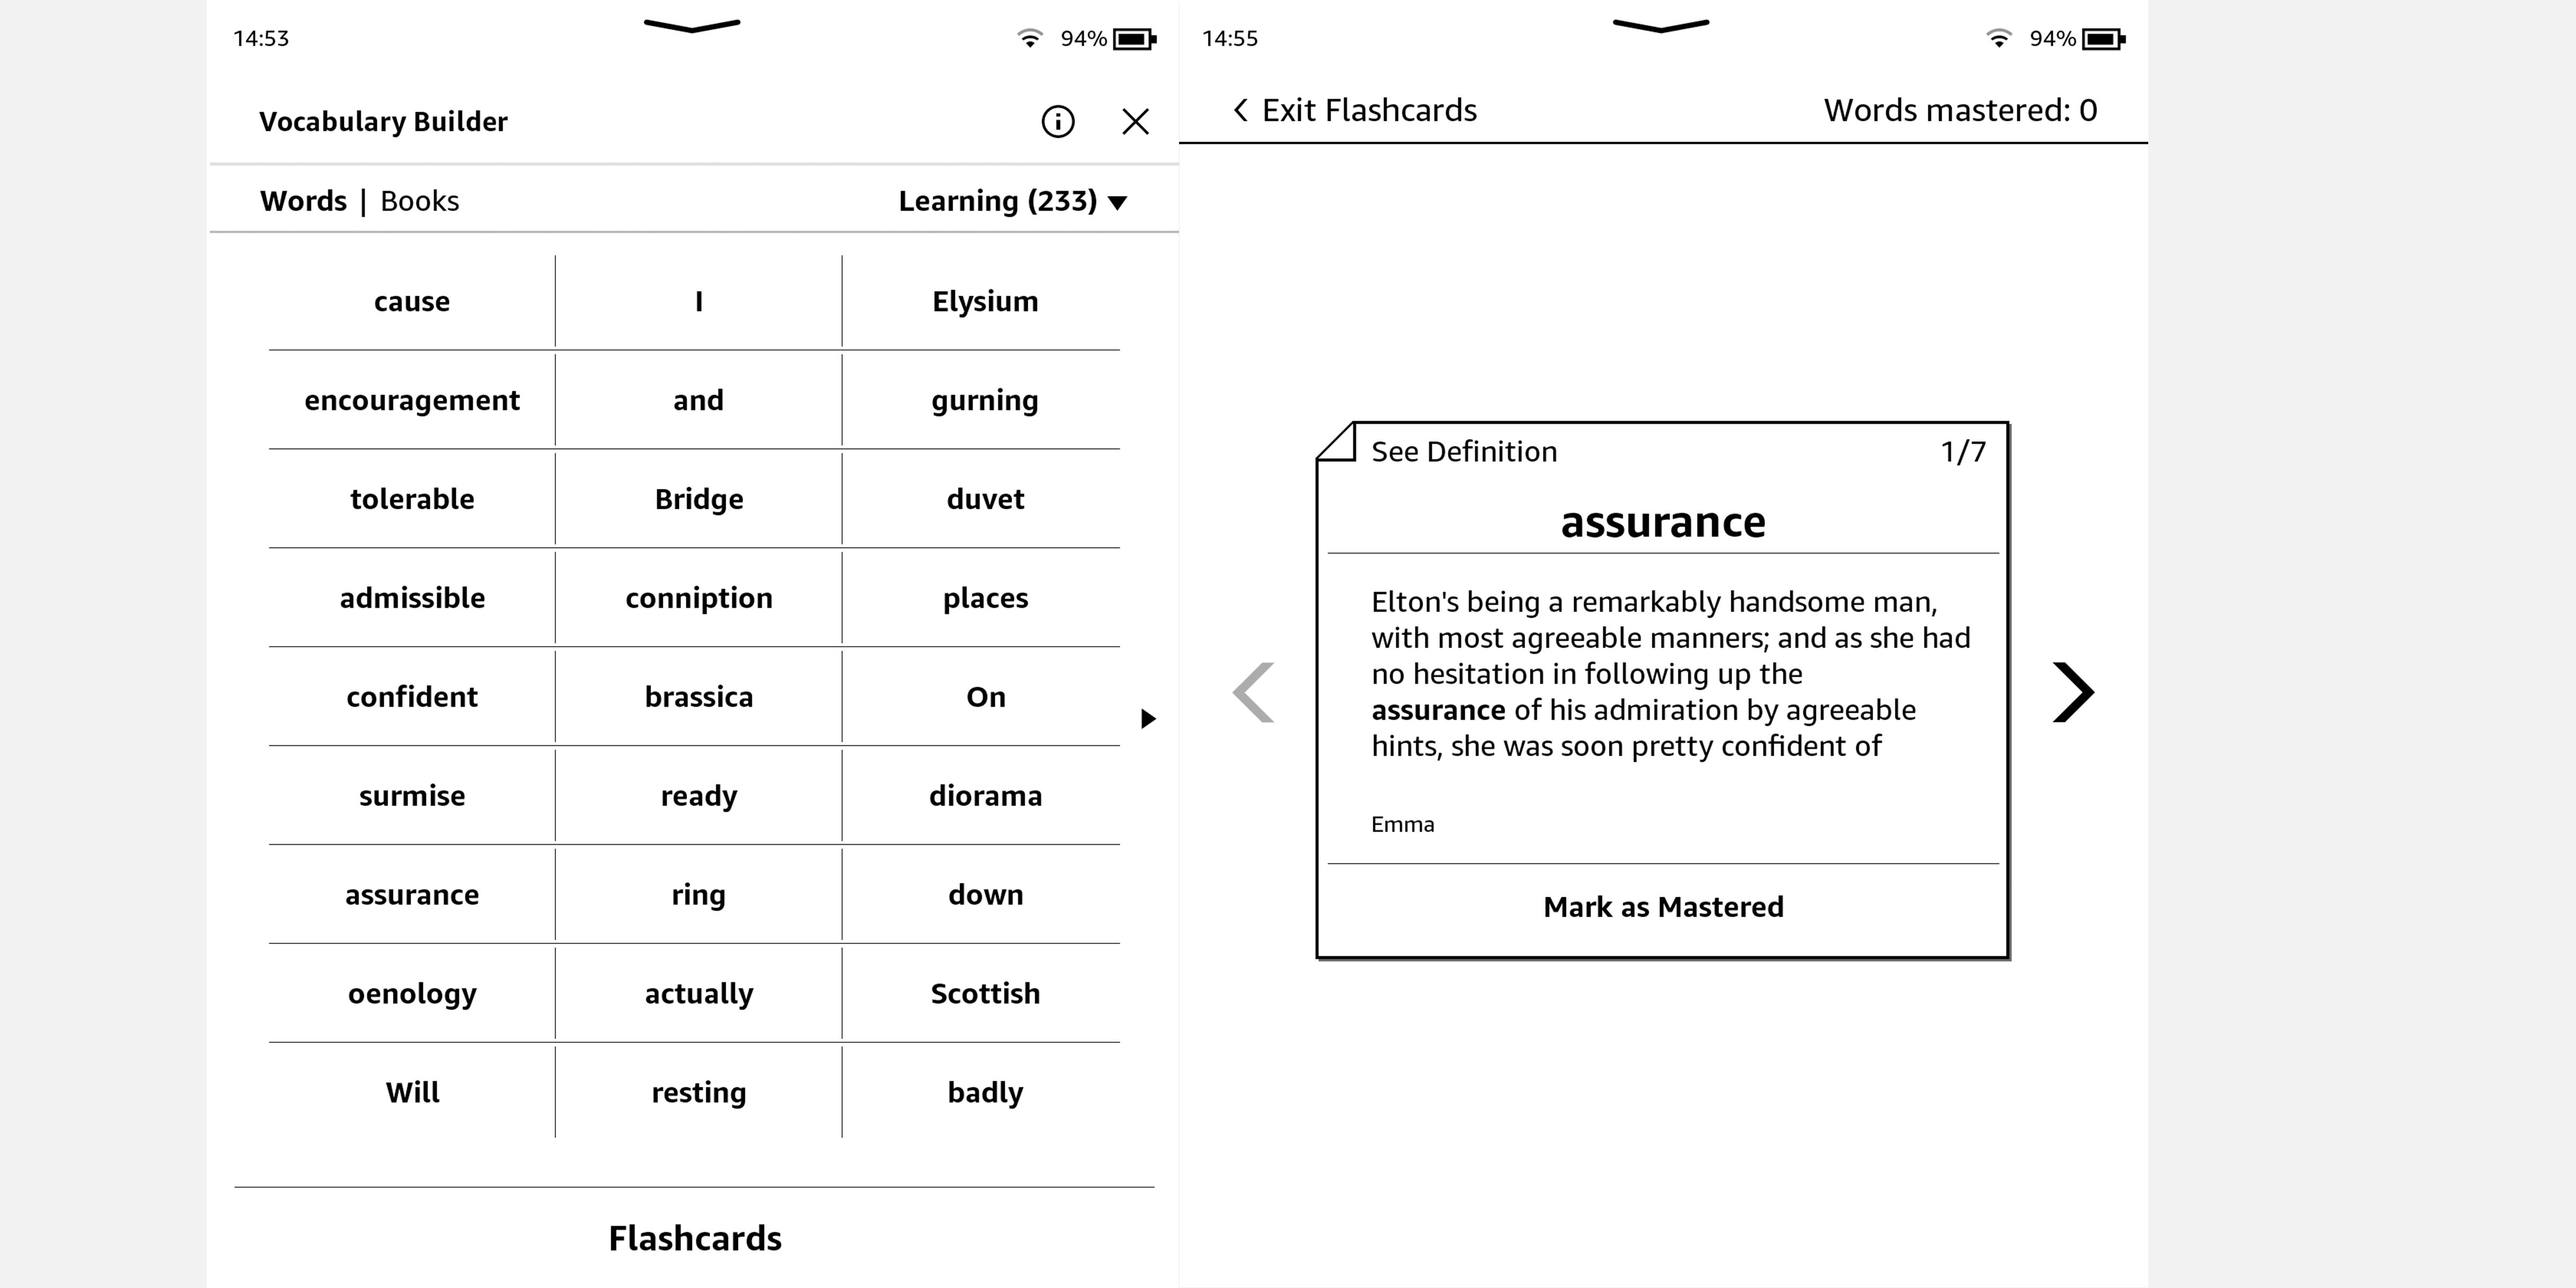 Screenshot of Kindle Oasis showing the Vocabulary Builder and Flashcards functions